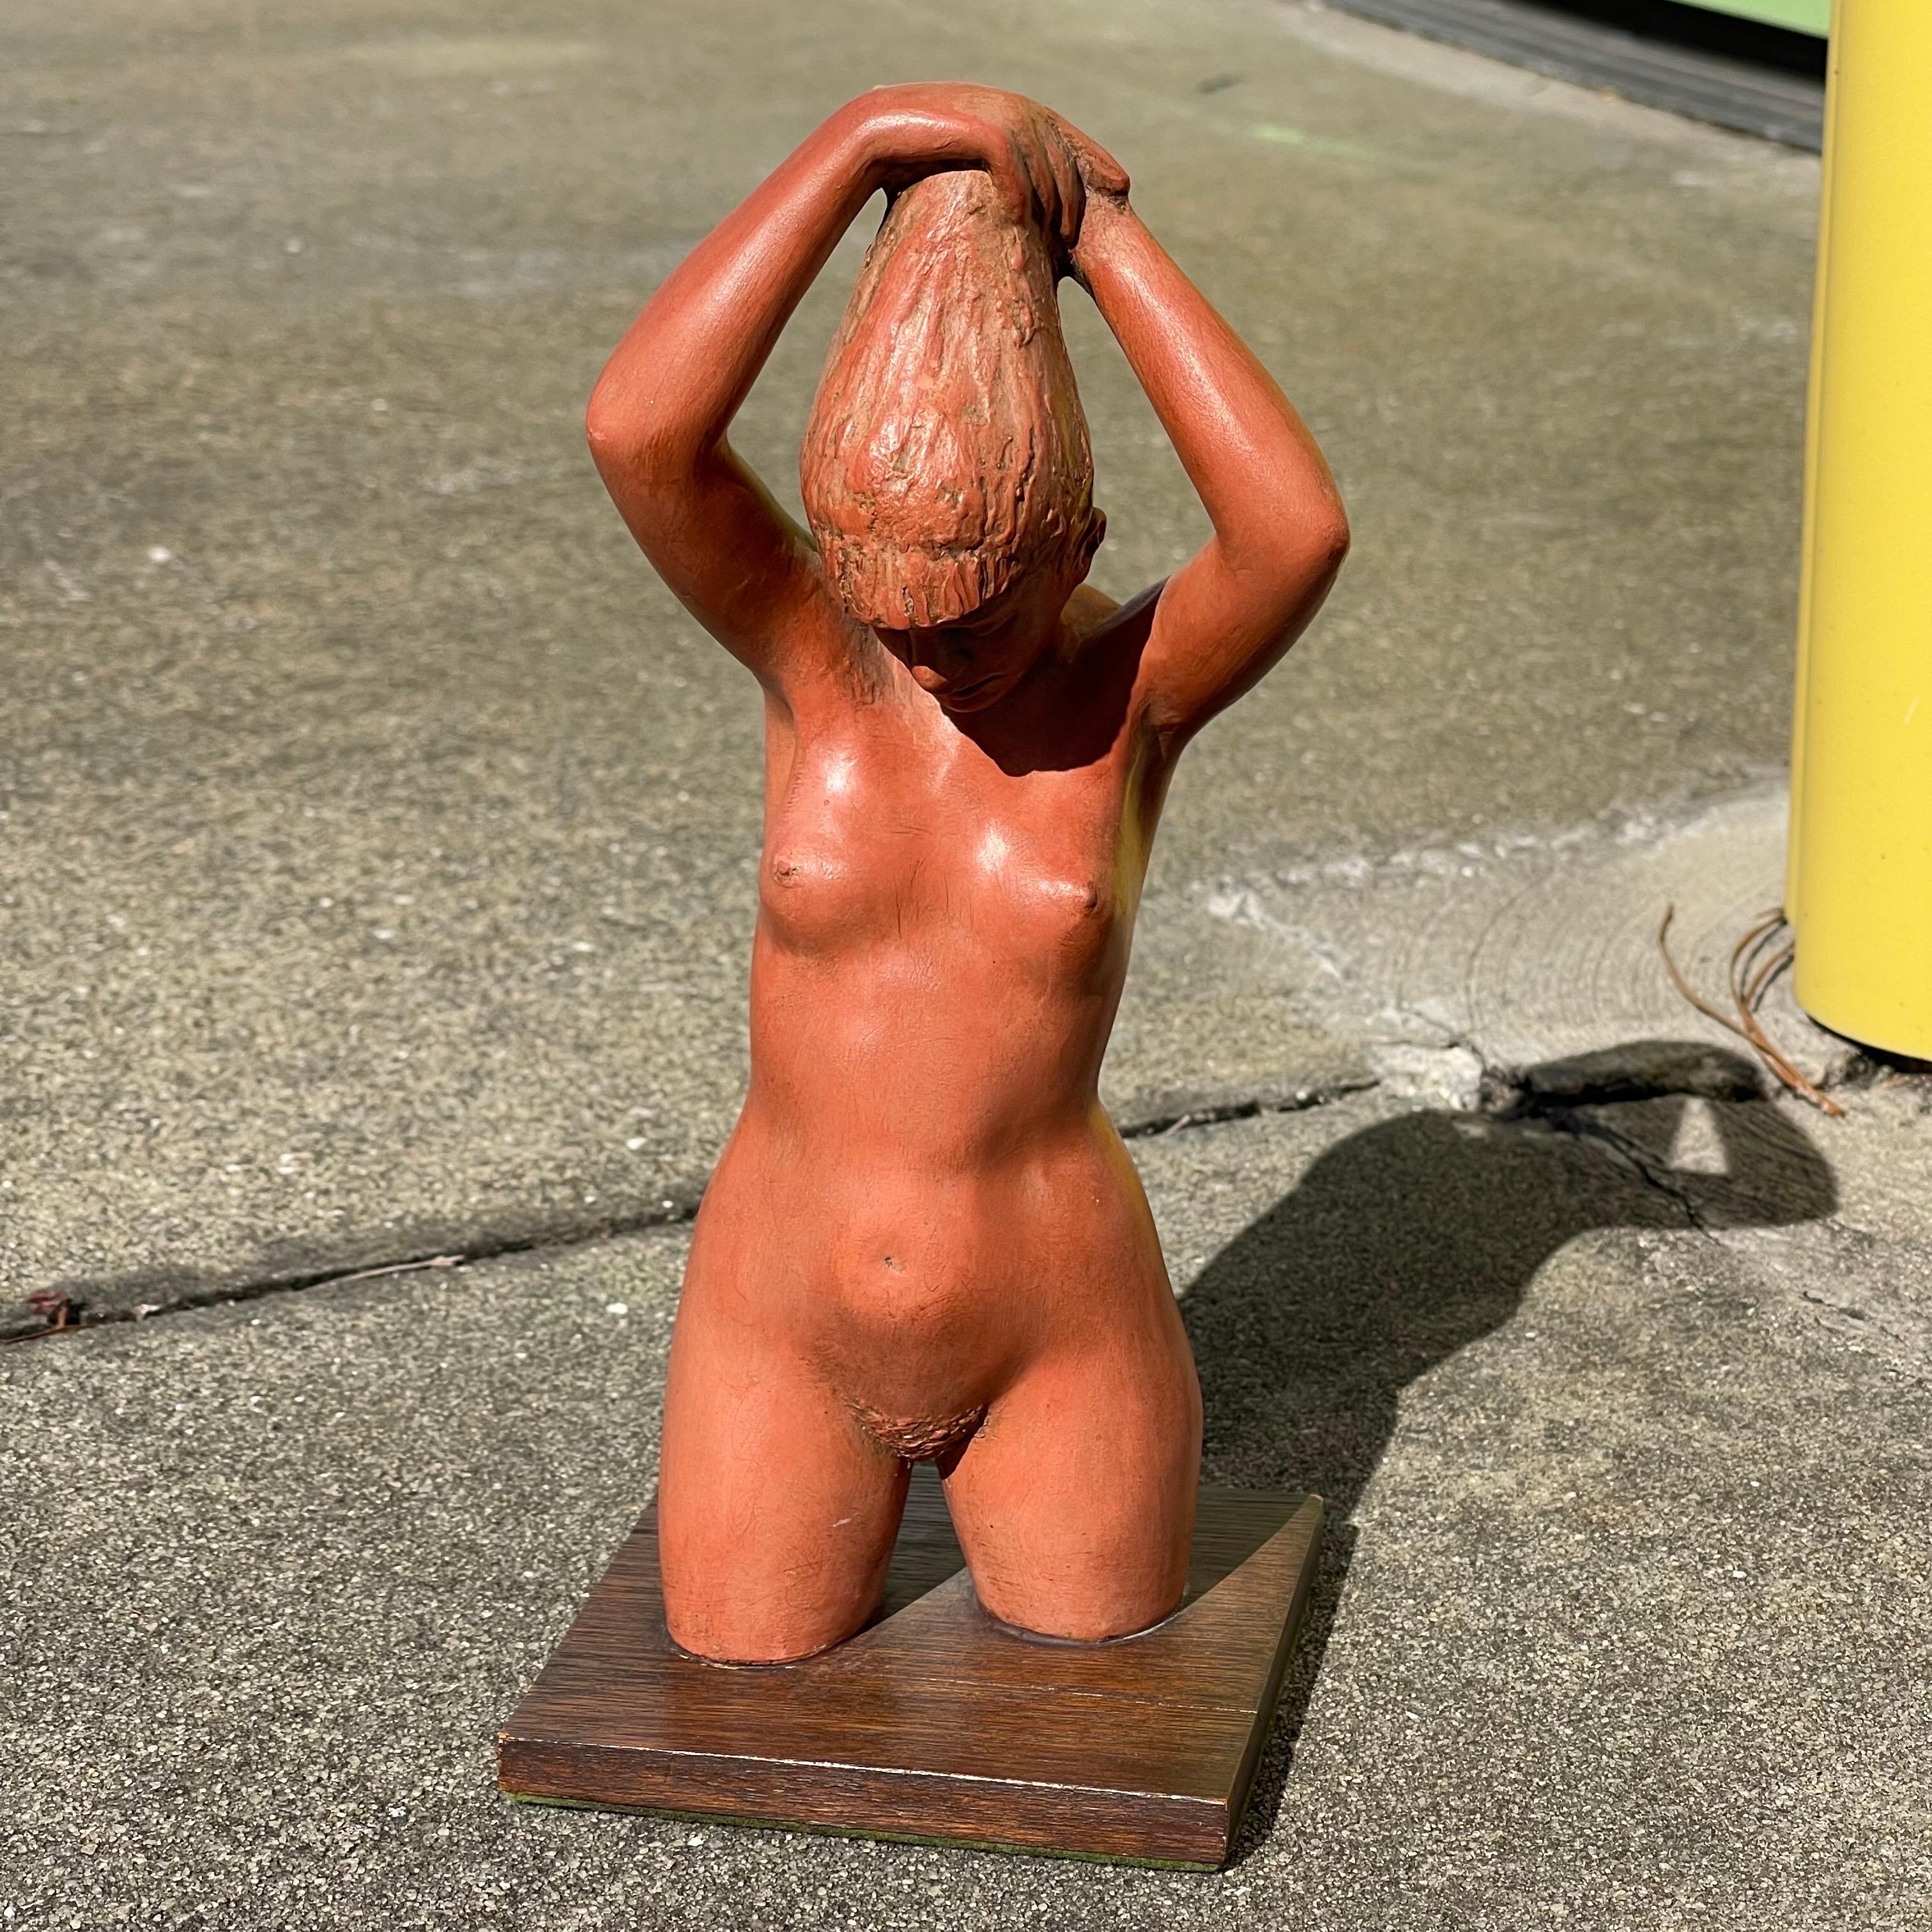 Striking figurative nude sculpture by Joe Brown. A bit of an anomaly, Brown served as professor of sculpture and boxing coach at Princeton. Usually known for his sports sculptures, this sweet example shows a more tender side of his work.